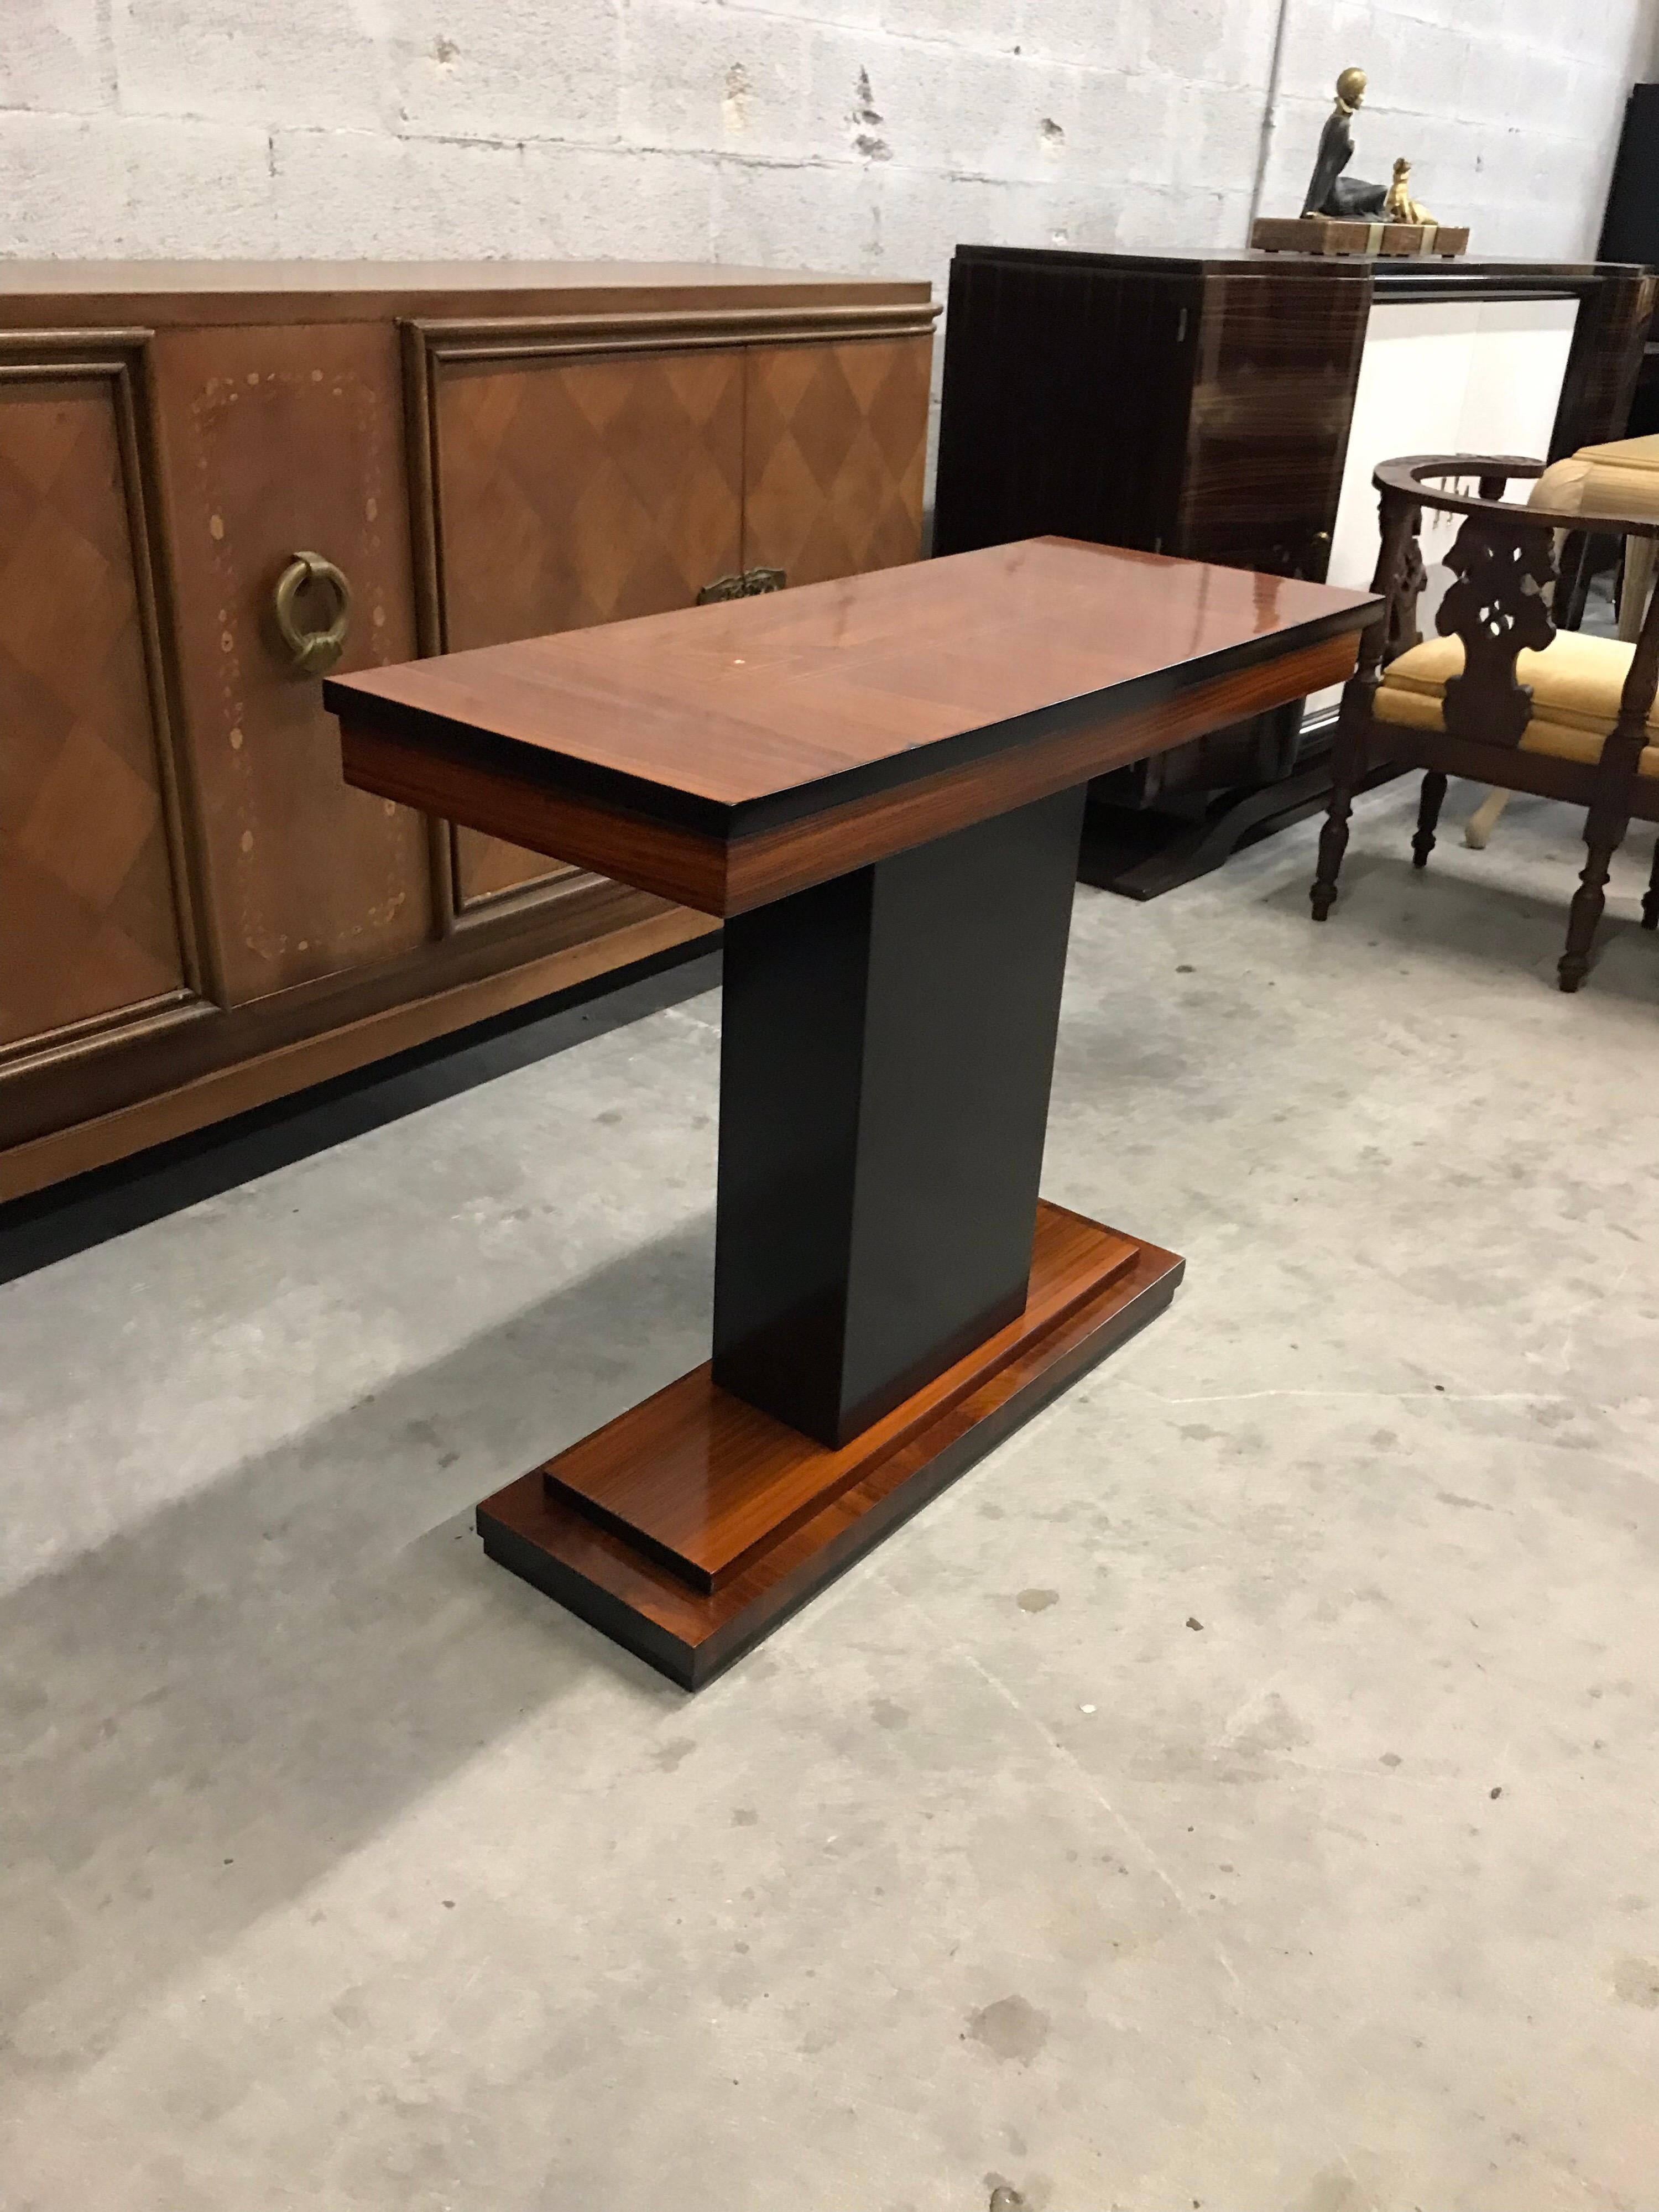 French Art Deco exotic Macassar console table, circa 1940s. Beautiful Macassar ebony with sycamore inlay, finish in both side that rest on makes it ideal for use as a bedside table or for the foyer room or entry, a fine example of Classic, French